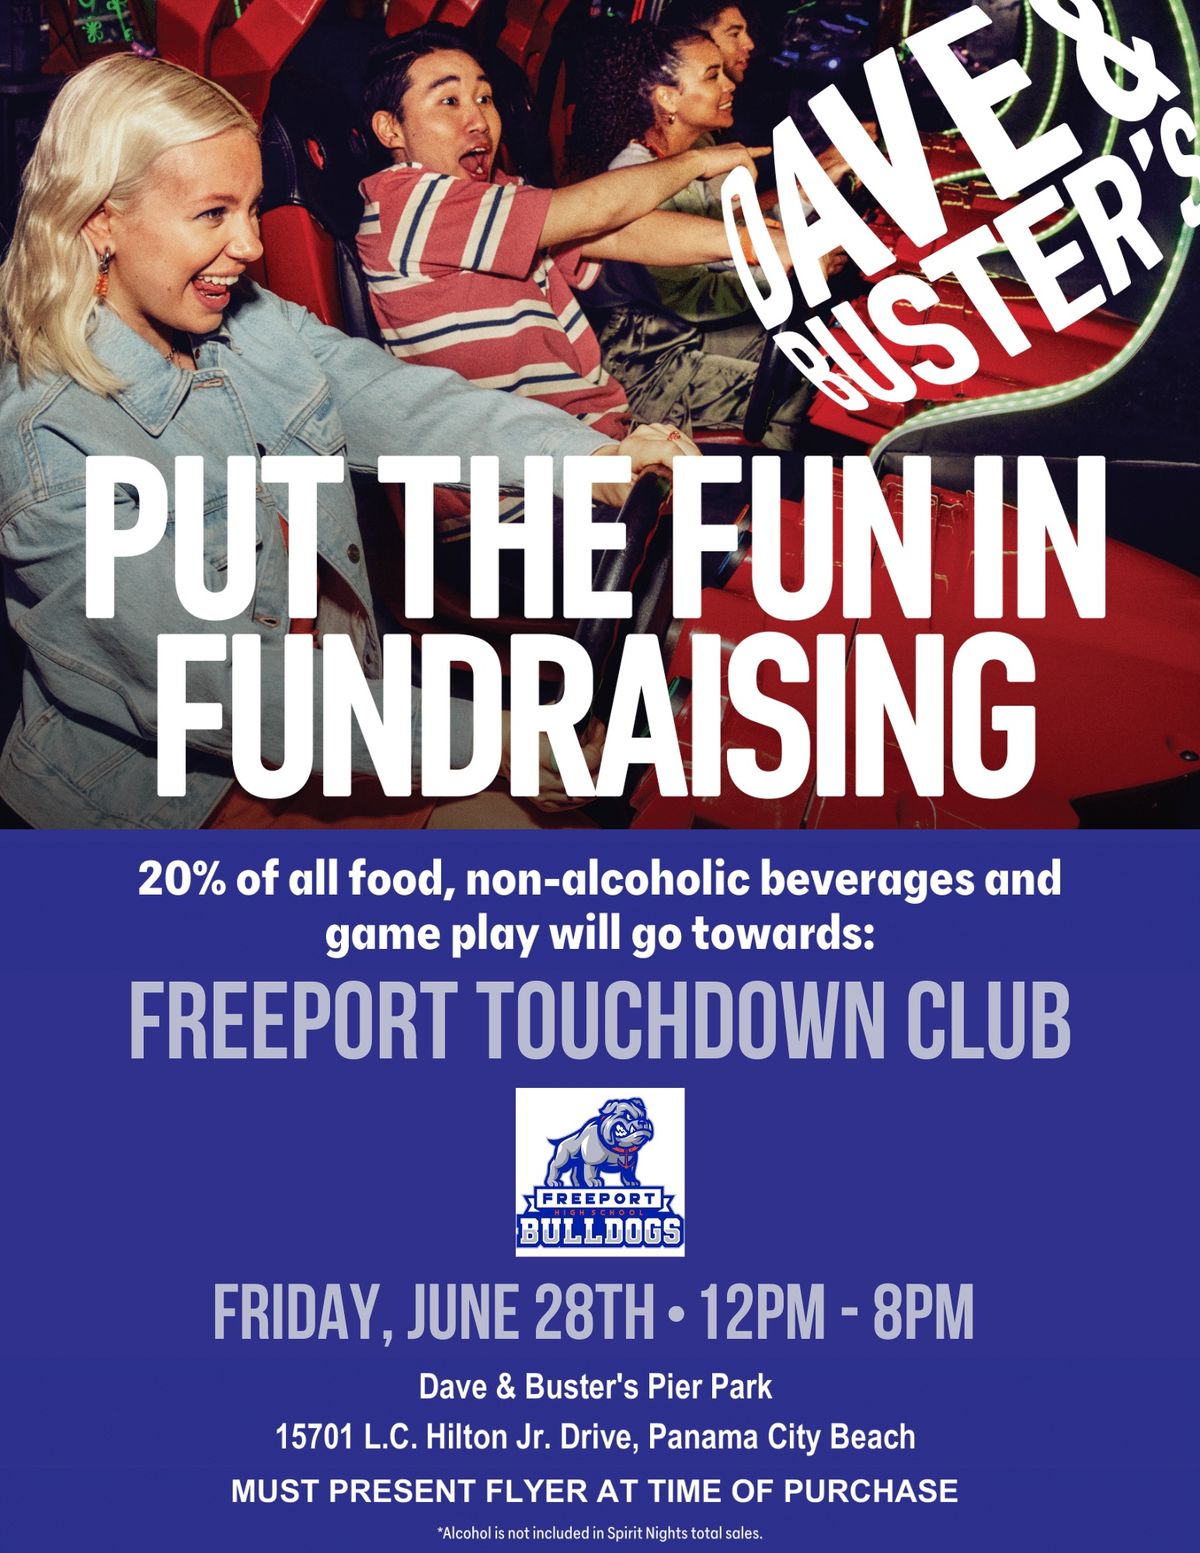 Night Out with Freeport Touchdown Club at Dave & Busters